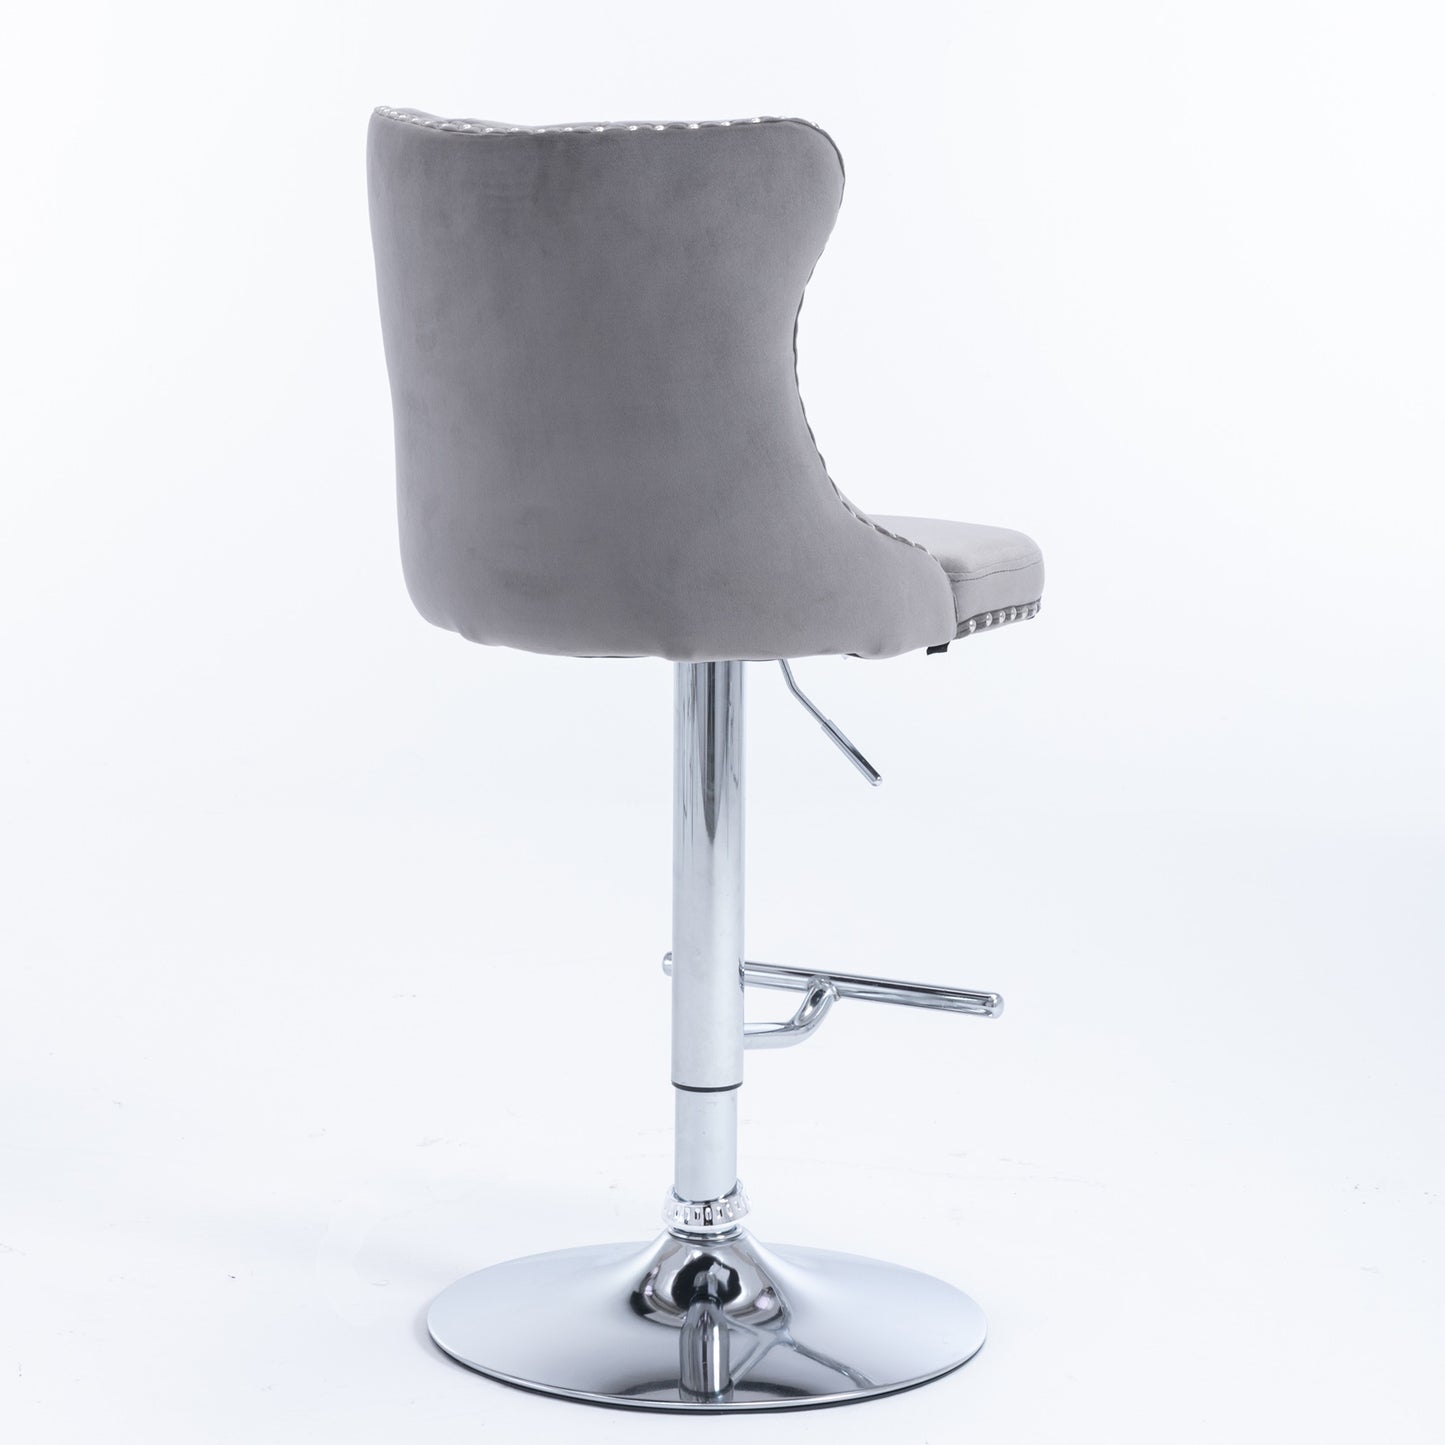 Gray/Silver Luxe Stool Set (2)